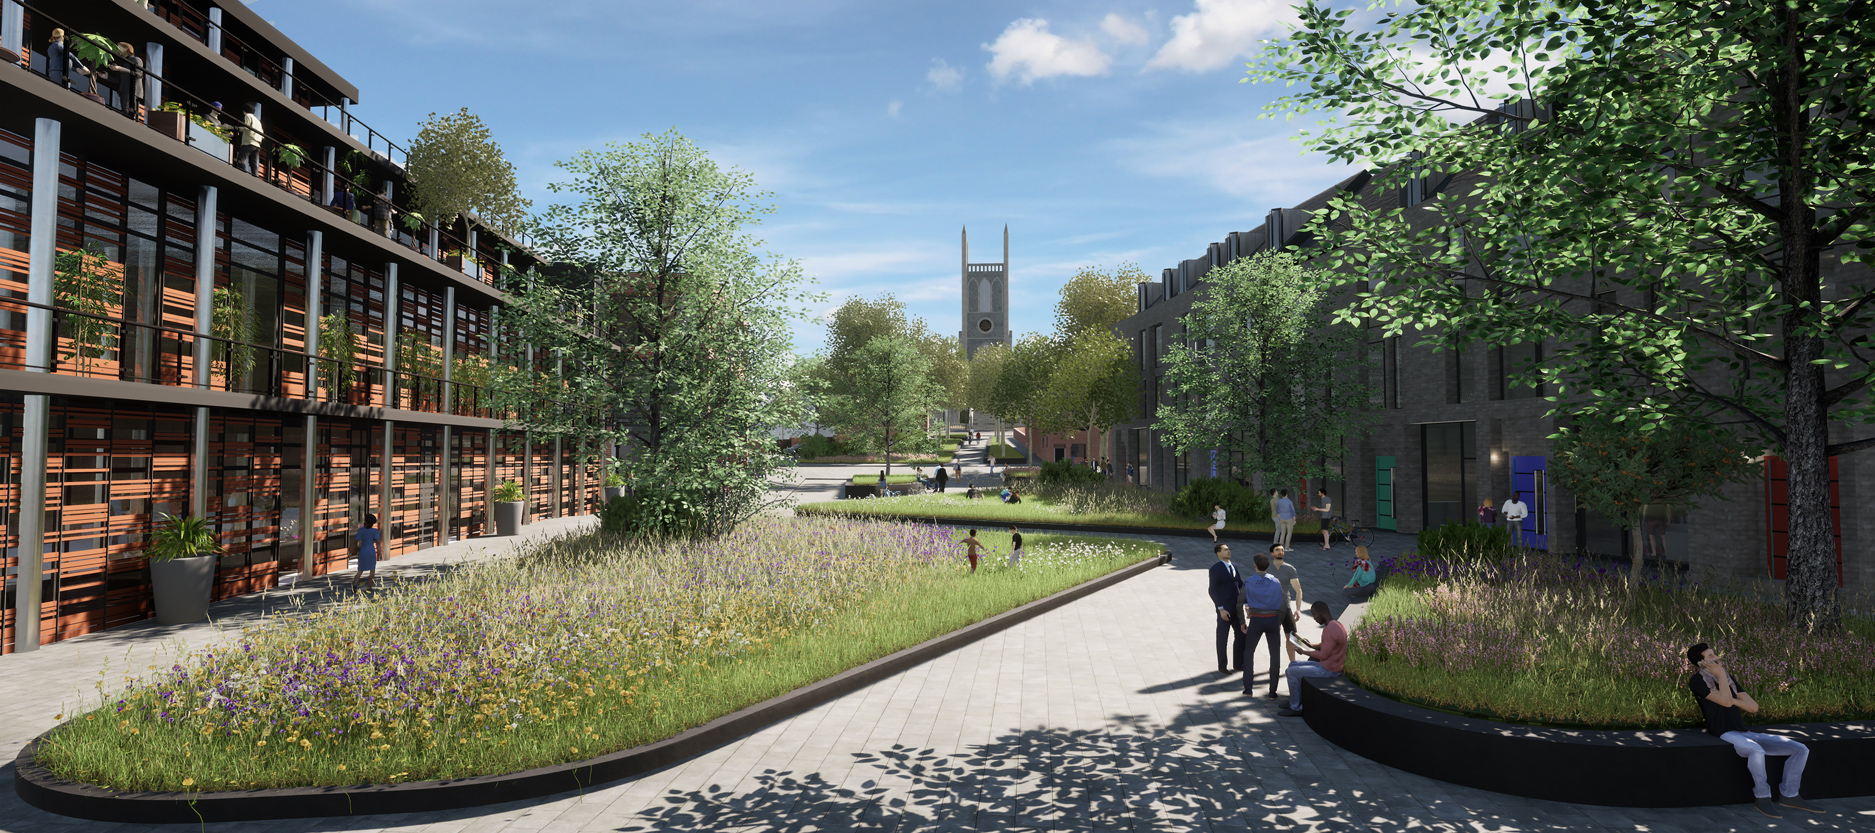 The Well-being Quarter provides space for an enhanced college and green to support leisure as well as improving views and connections through to St. Mary's Church and Vigo Park